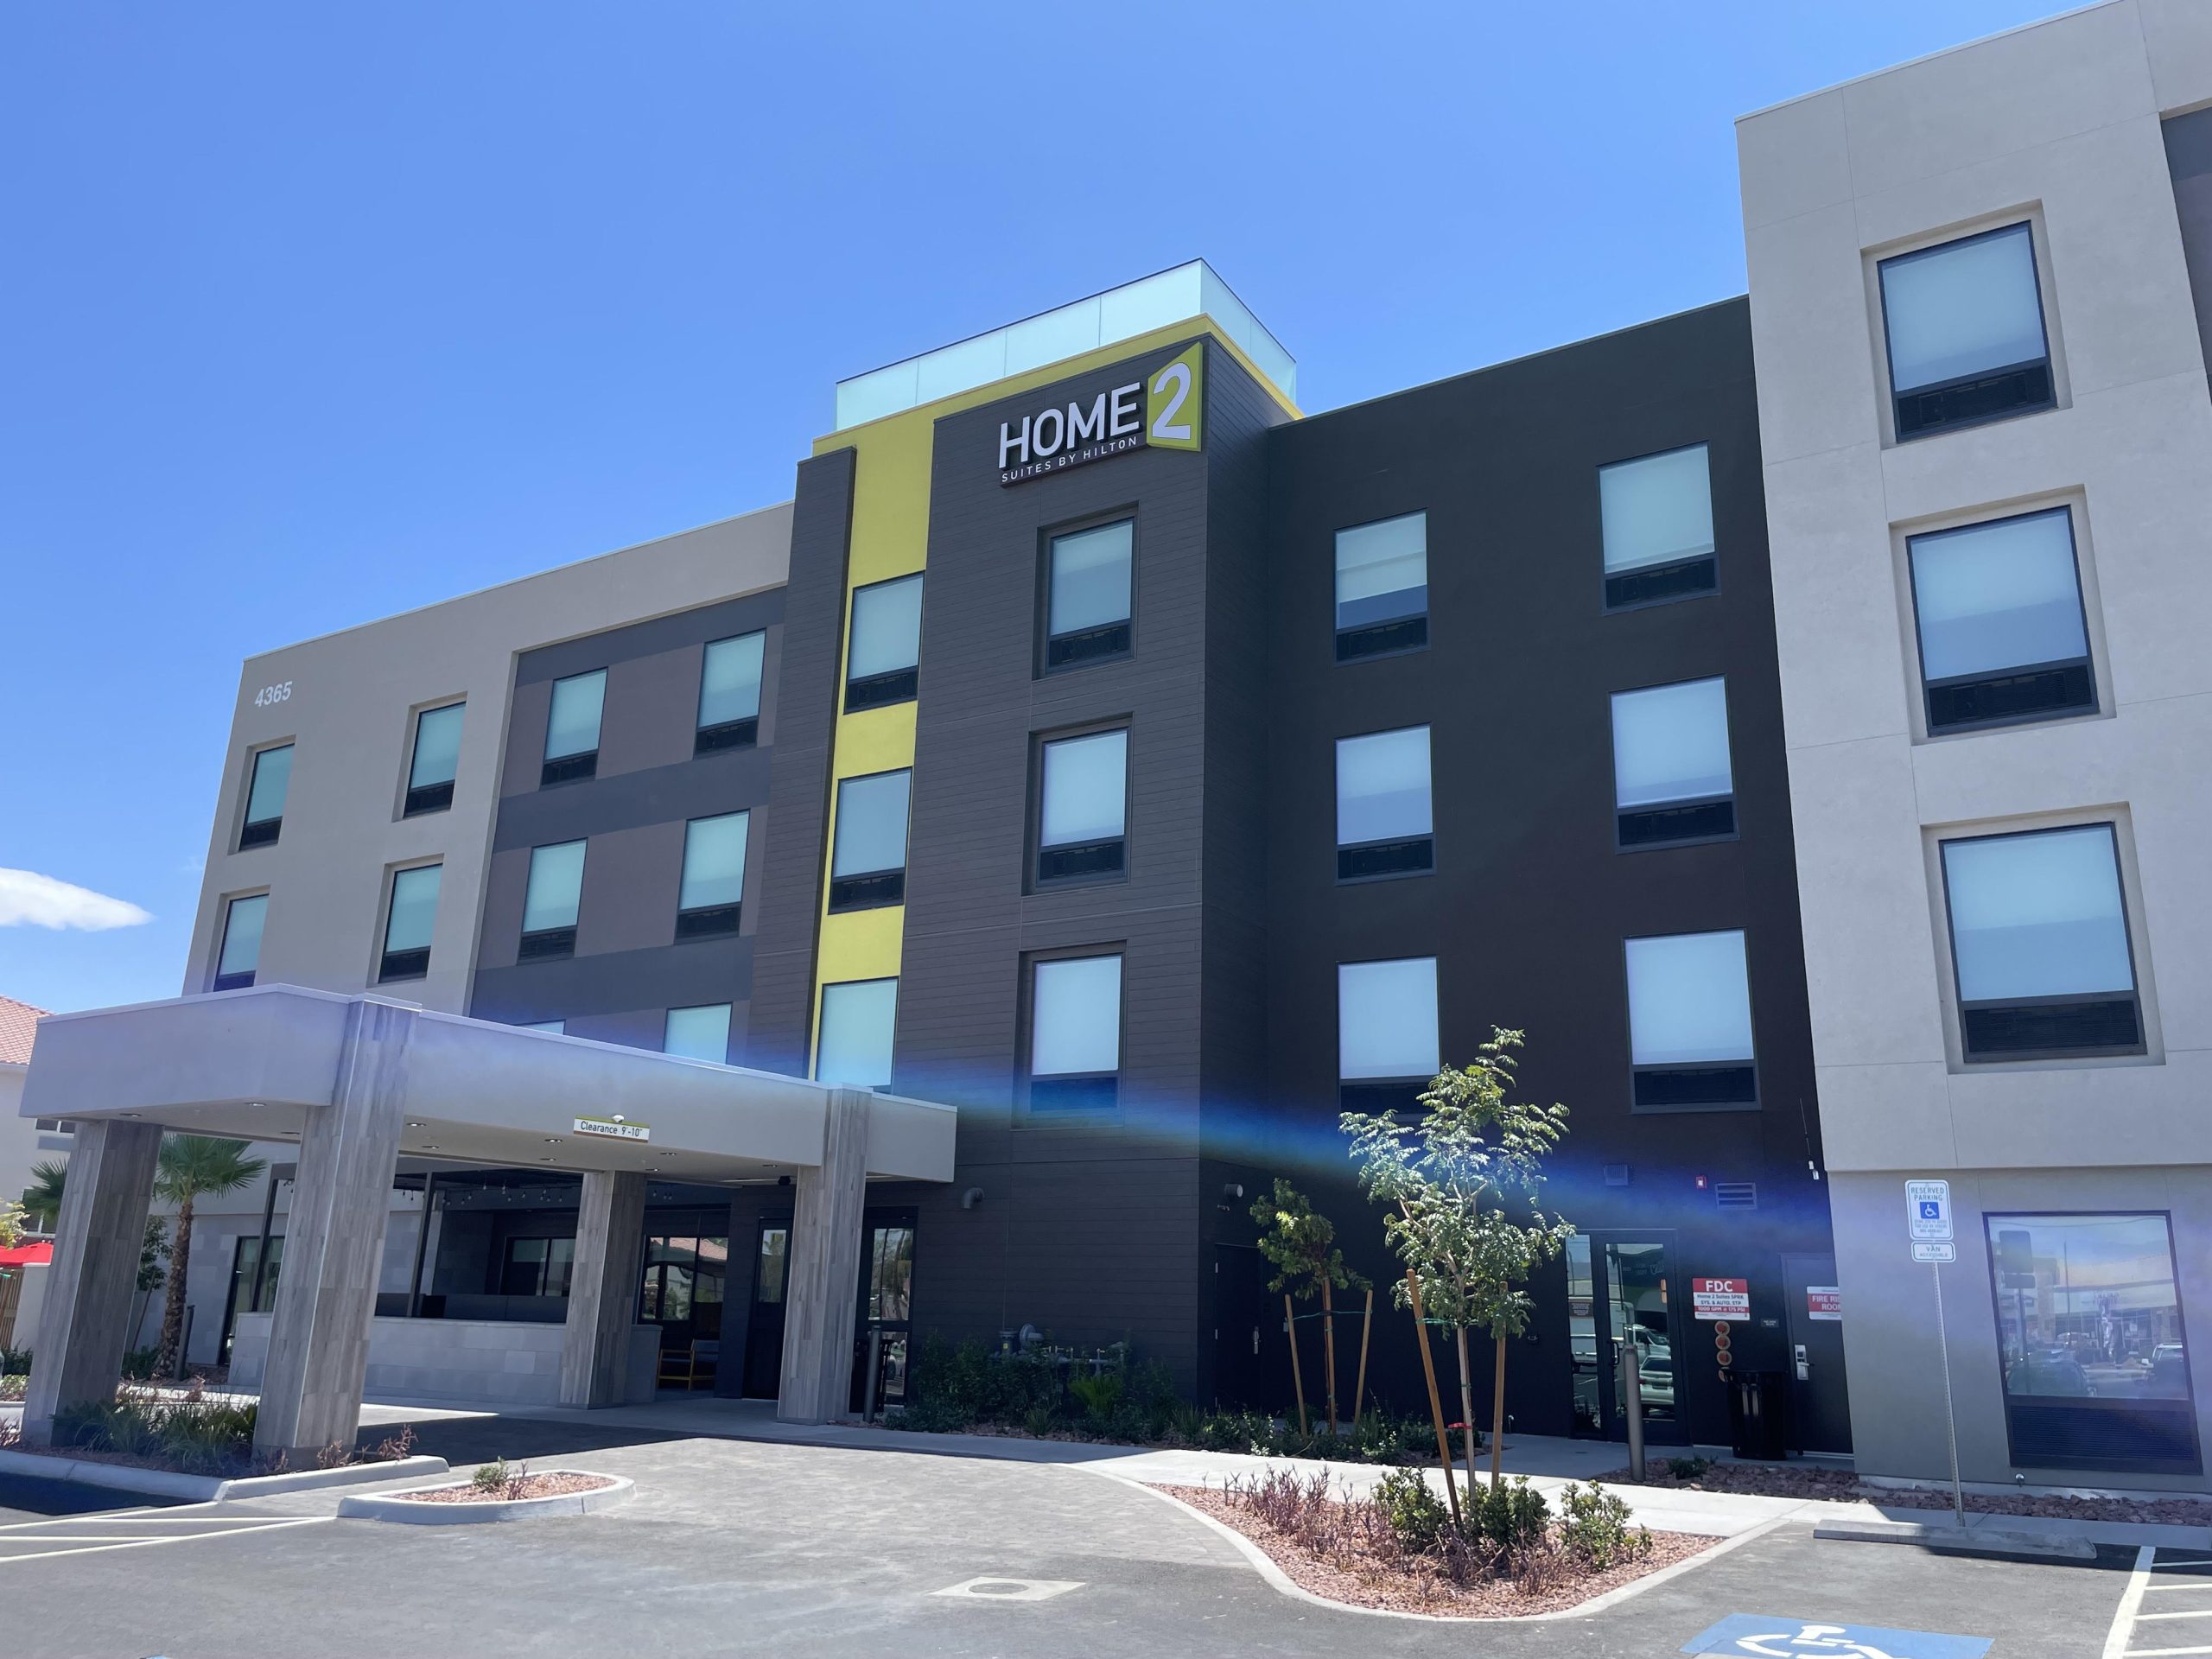 Celebrating the Opening of the Hilton Home2 Suites in Las Vegas